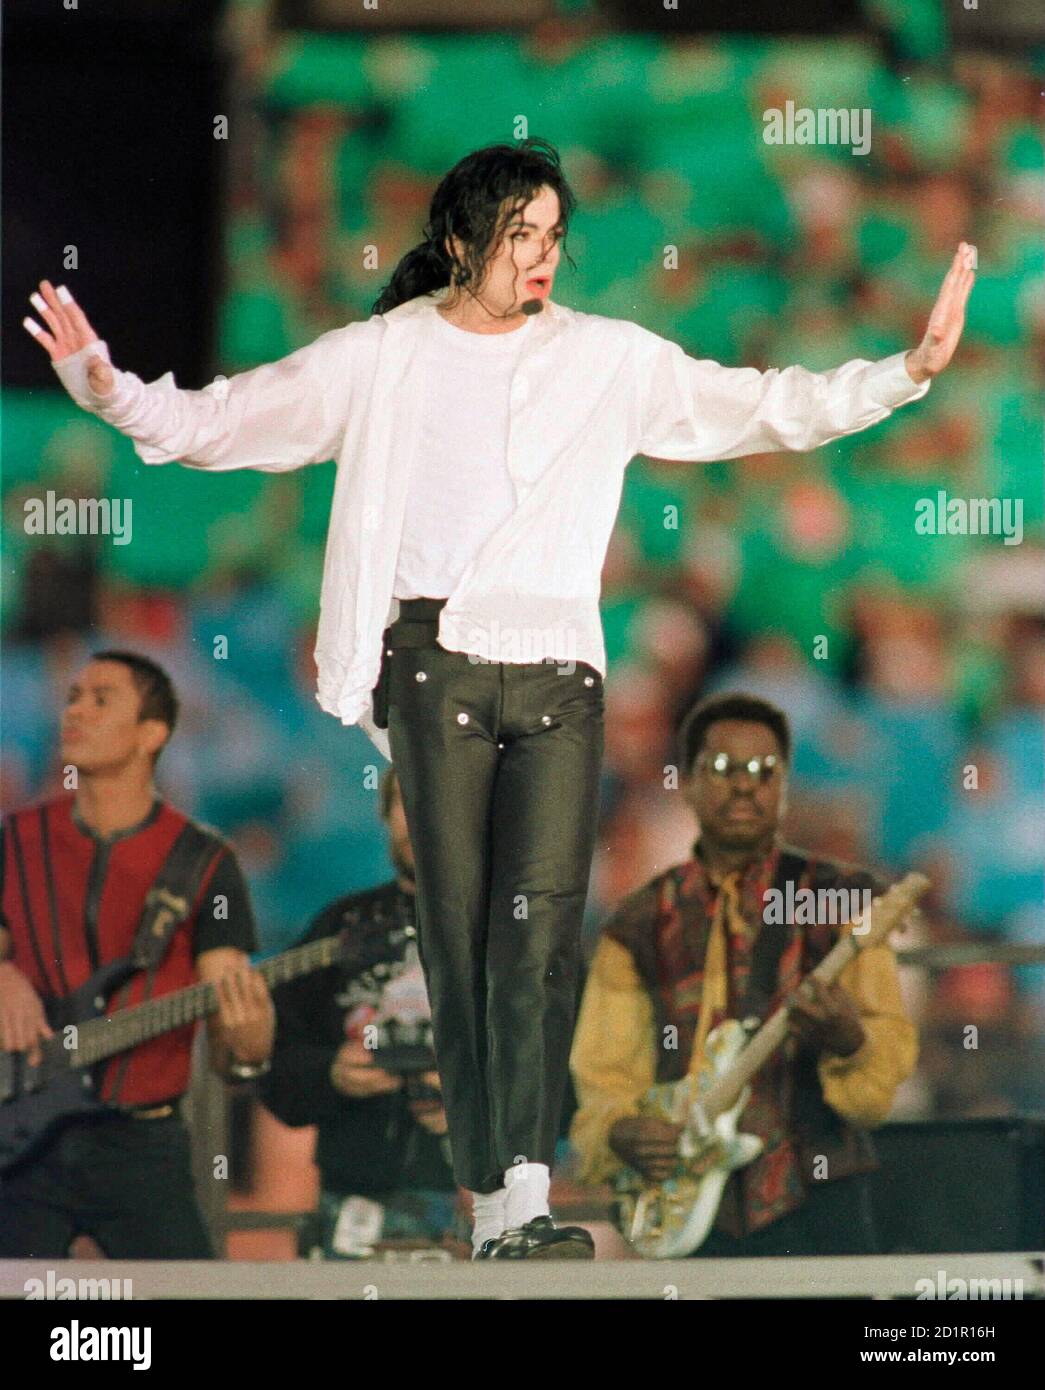 Michael Jackson performs during the halftime show at the NFL's Super Bowl  XXVII in Pasadena, California, in this January 31, 1993 file photo. The  body of Michael Jackson has been released to